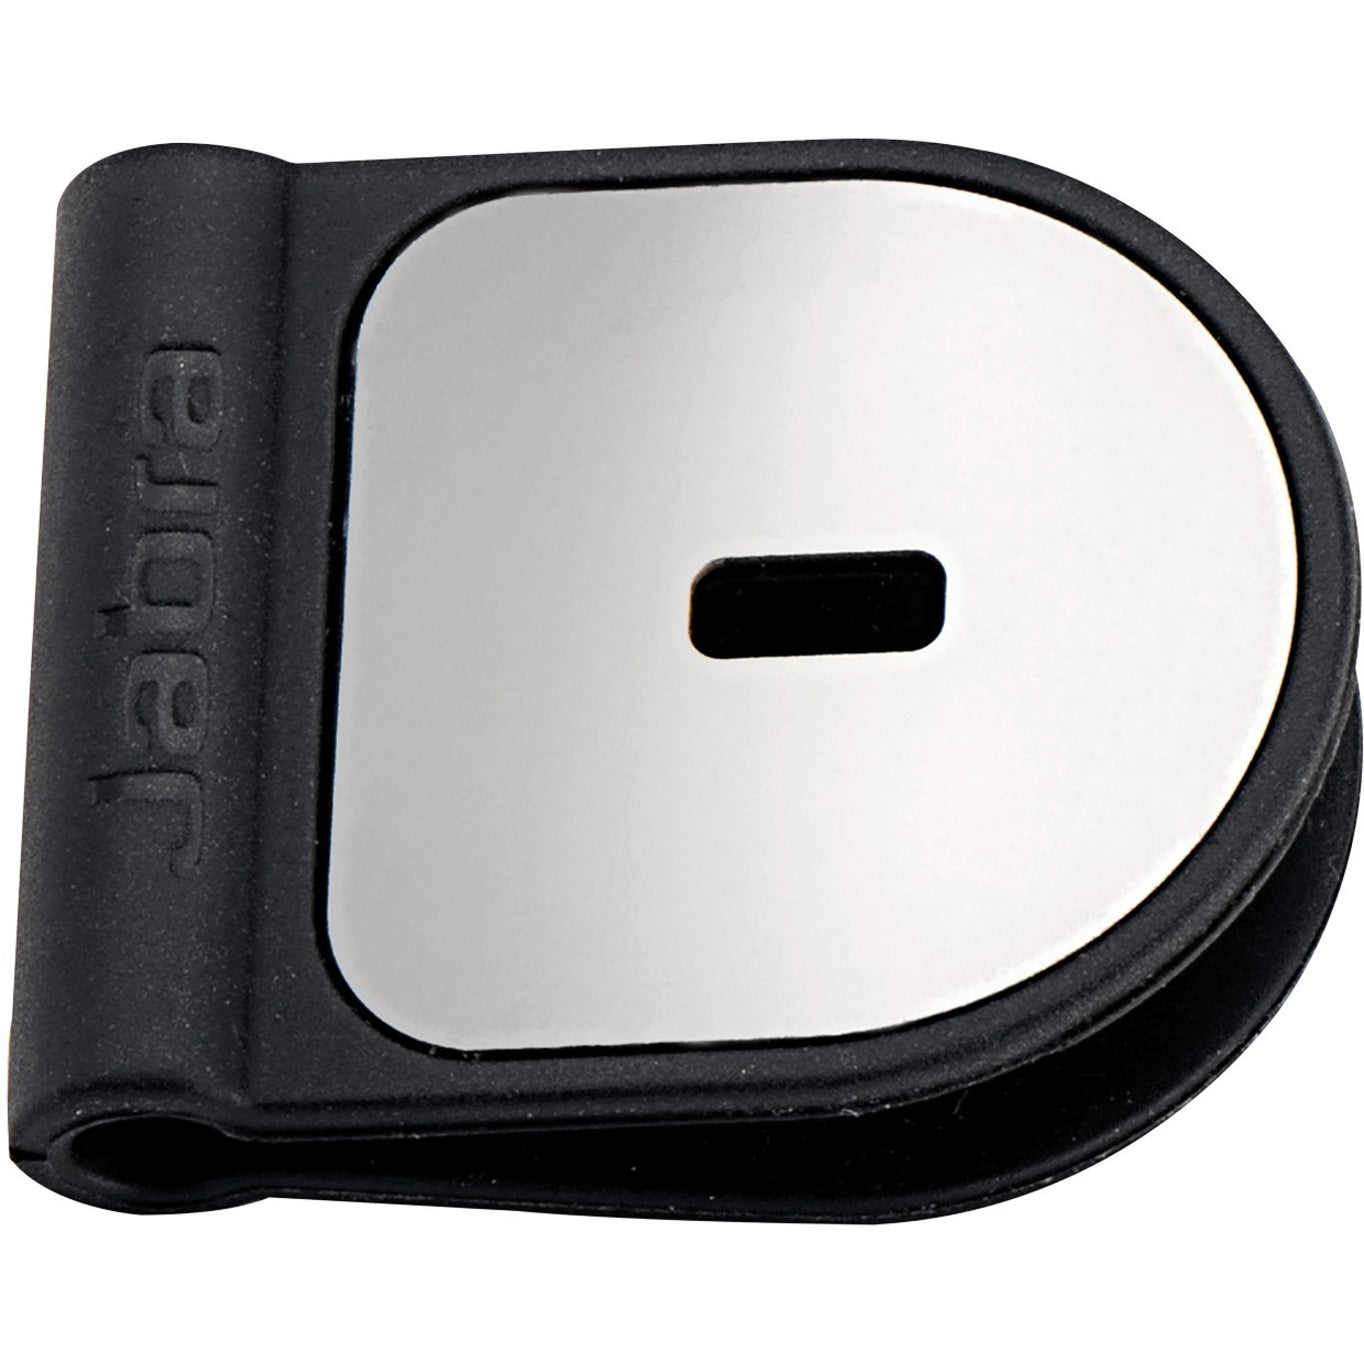 Jabra 14208-10 Kensington Lock Adaptor Accessory, Security for Your Devices